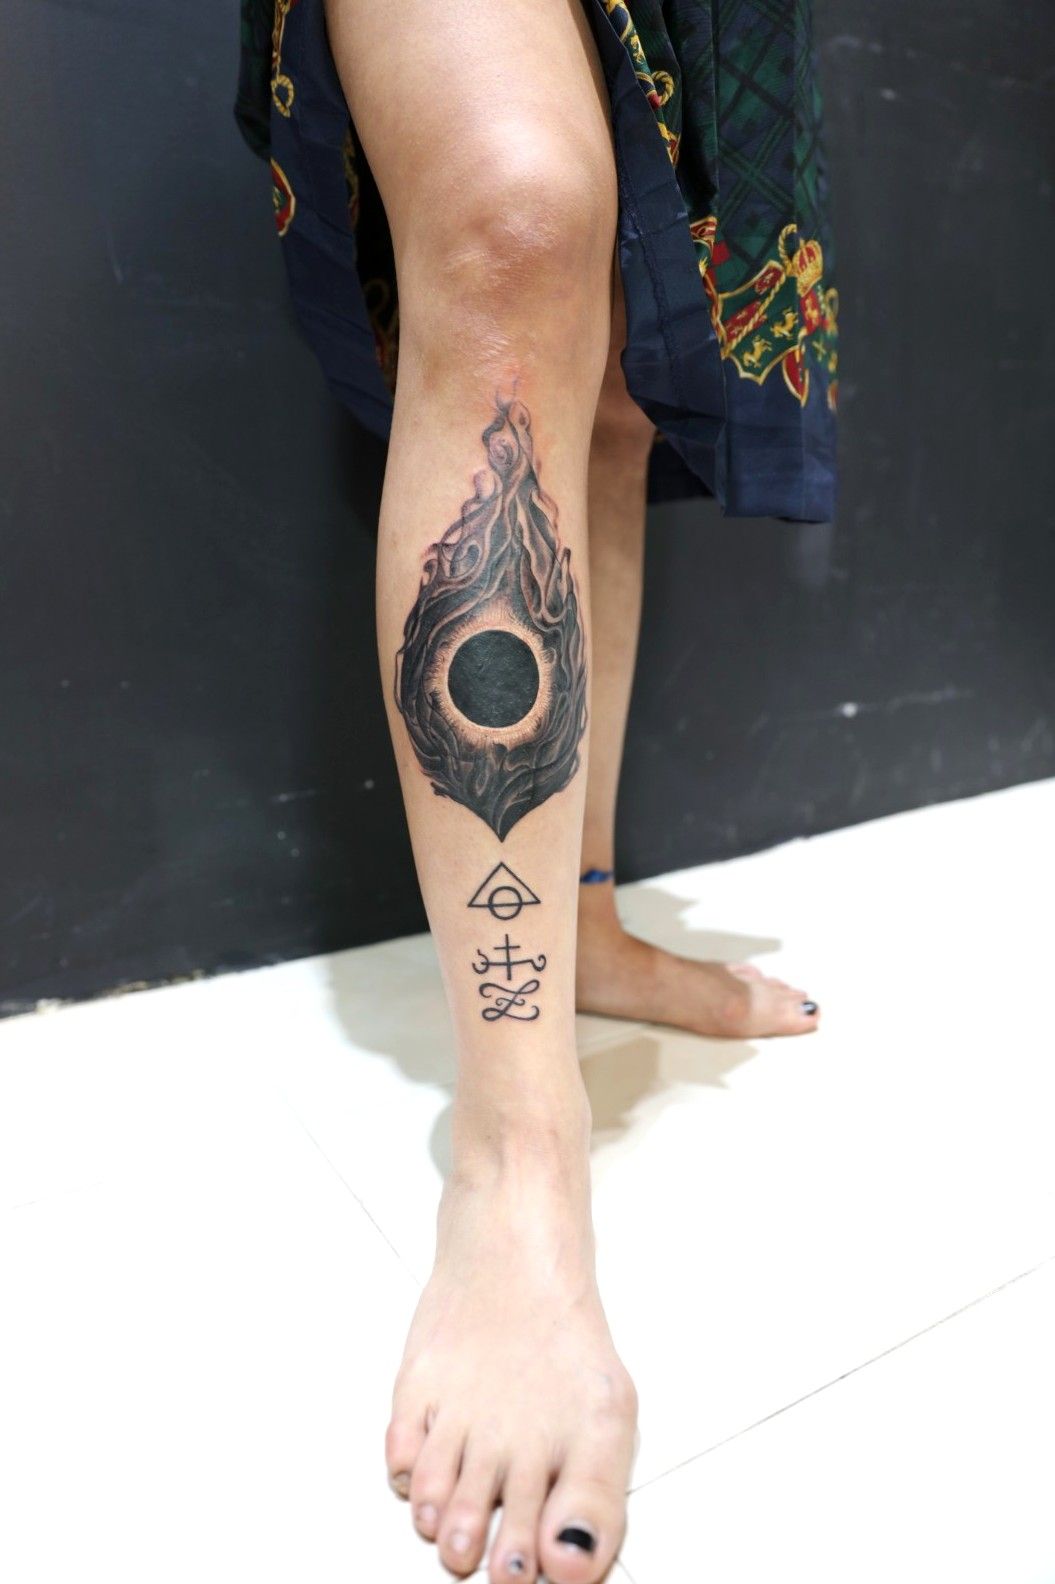 Are you thinking about a black sun tattoo Here are some ideas